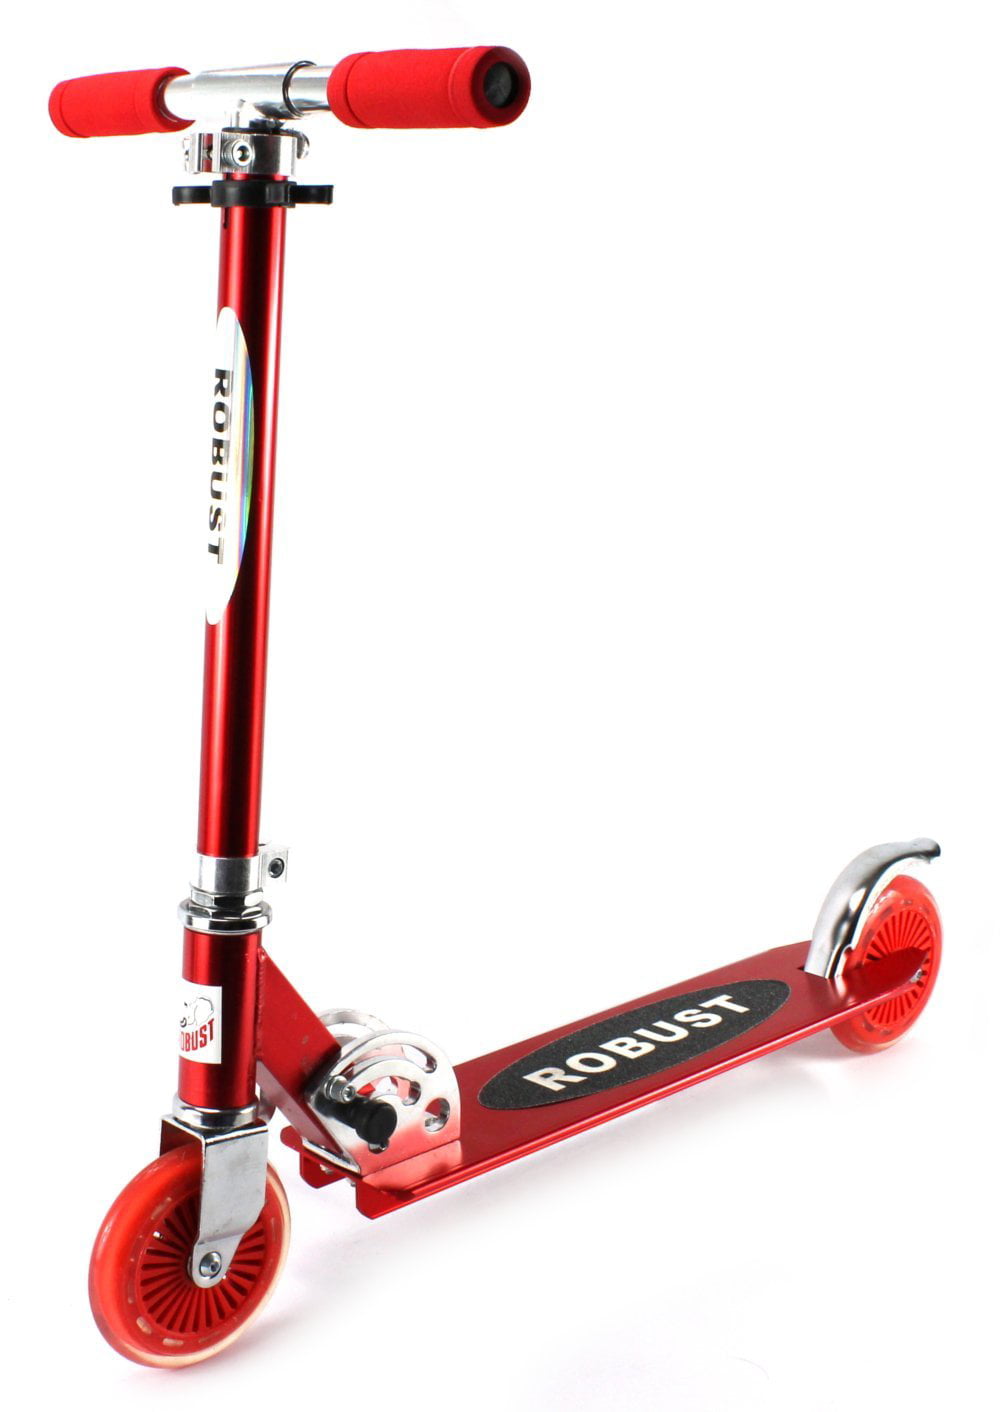 REDLIRO Kick Scooter for Teenager Trick Ultra-Light Aluminum Pole and Adjustable Handlebar Quality Freestyle Kick Complete Scooter for Beginner Kids Boys Girls Teens Ages 8+ 